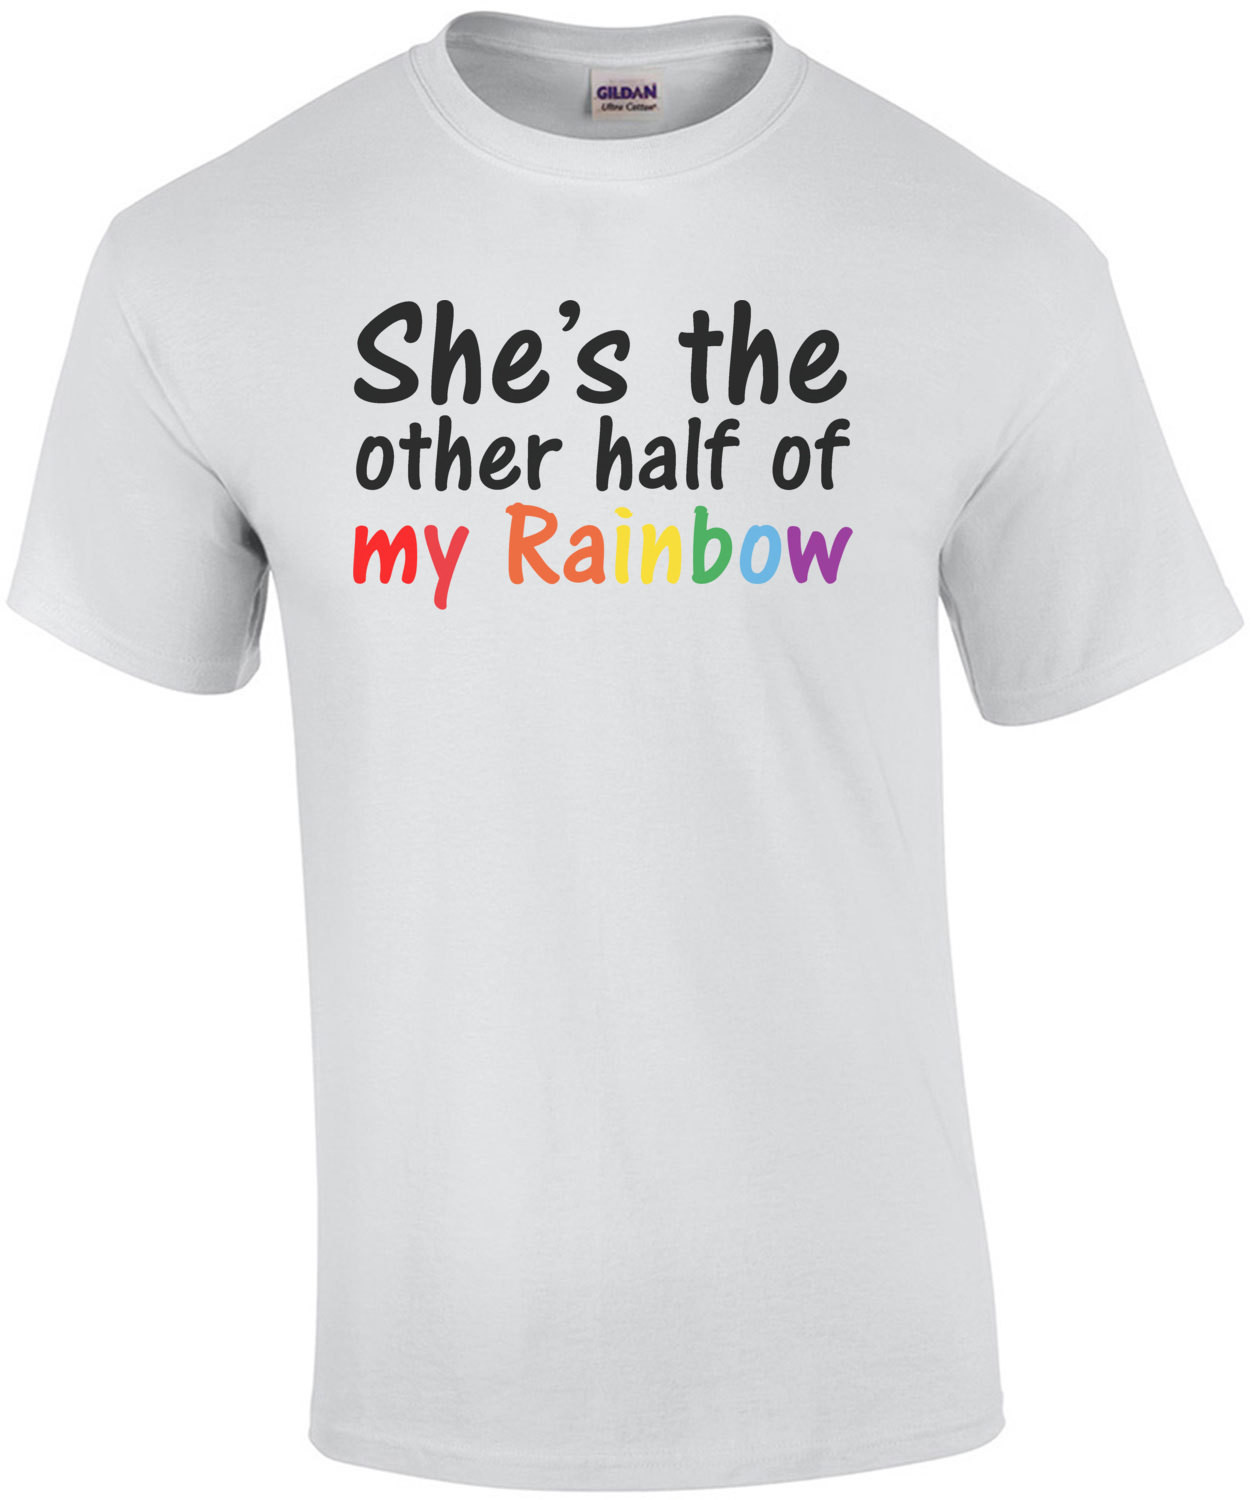 She's the other half of my rainbow - gay pride t-shirt